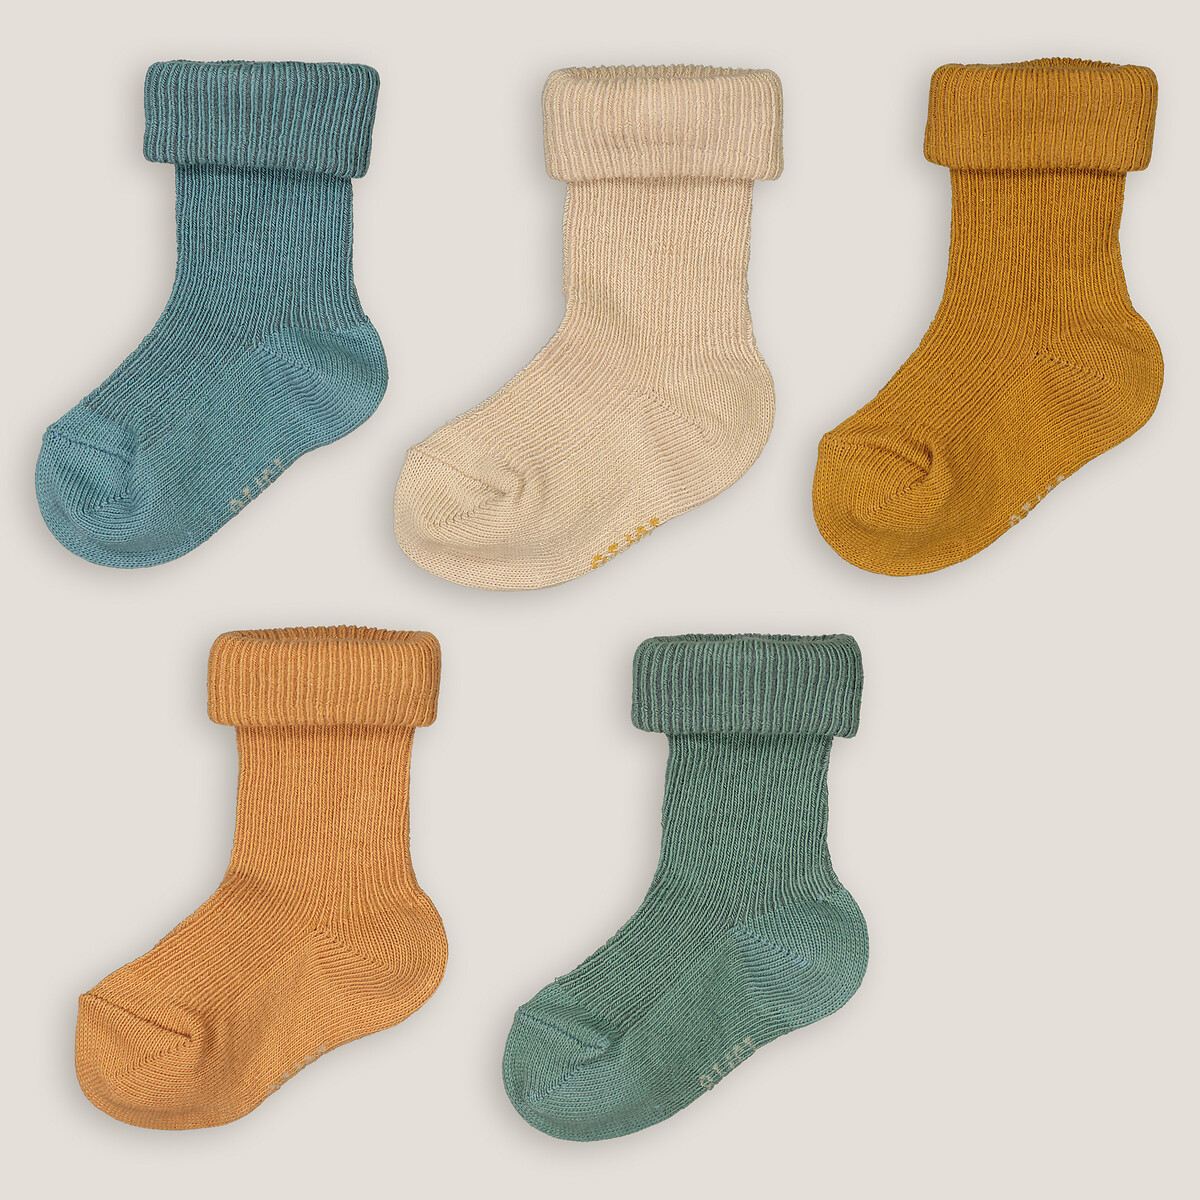 Pack of 5 Pairs of Turnover Socks in Cotton Mix